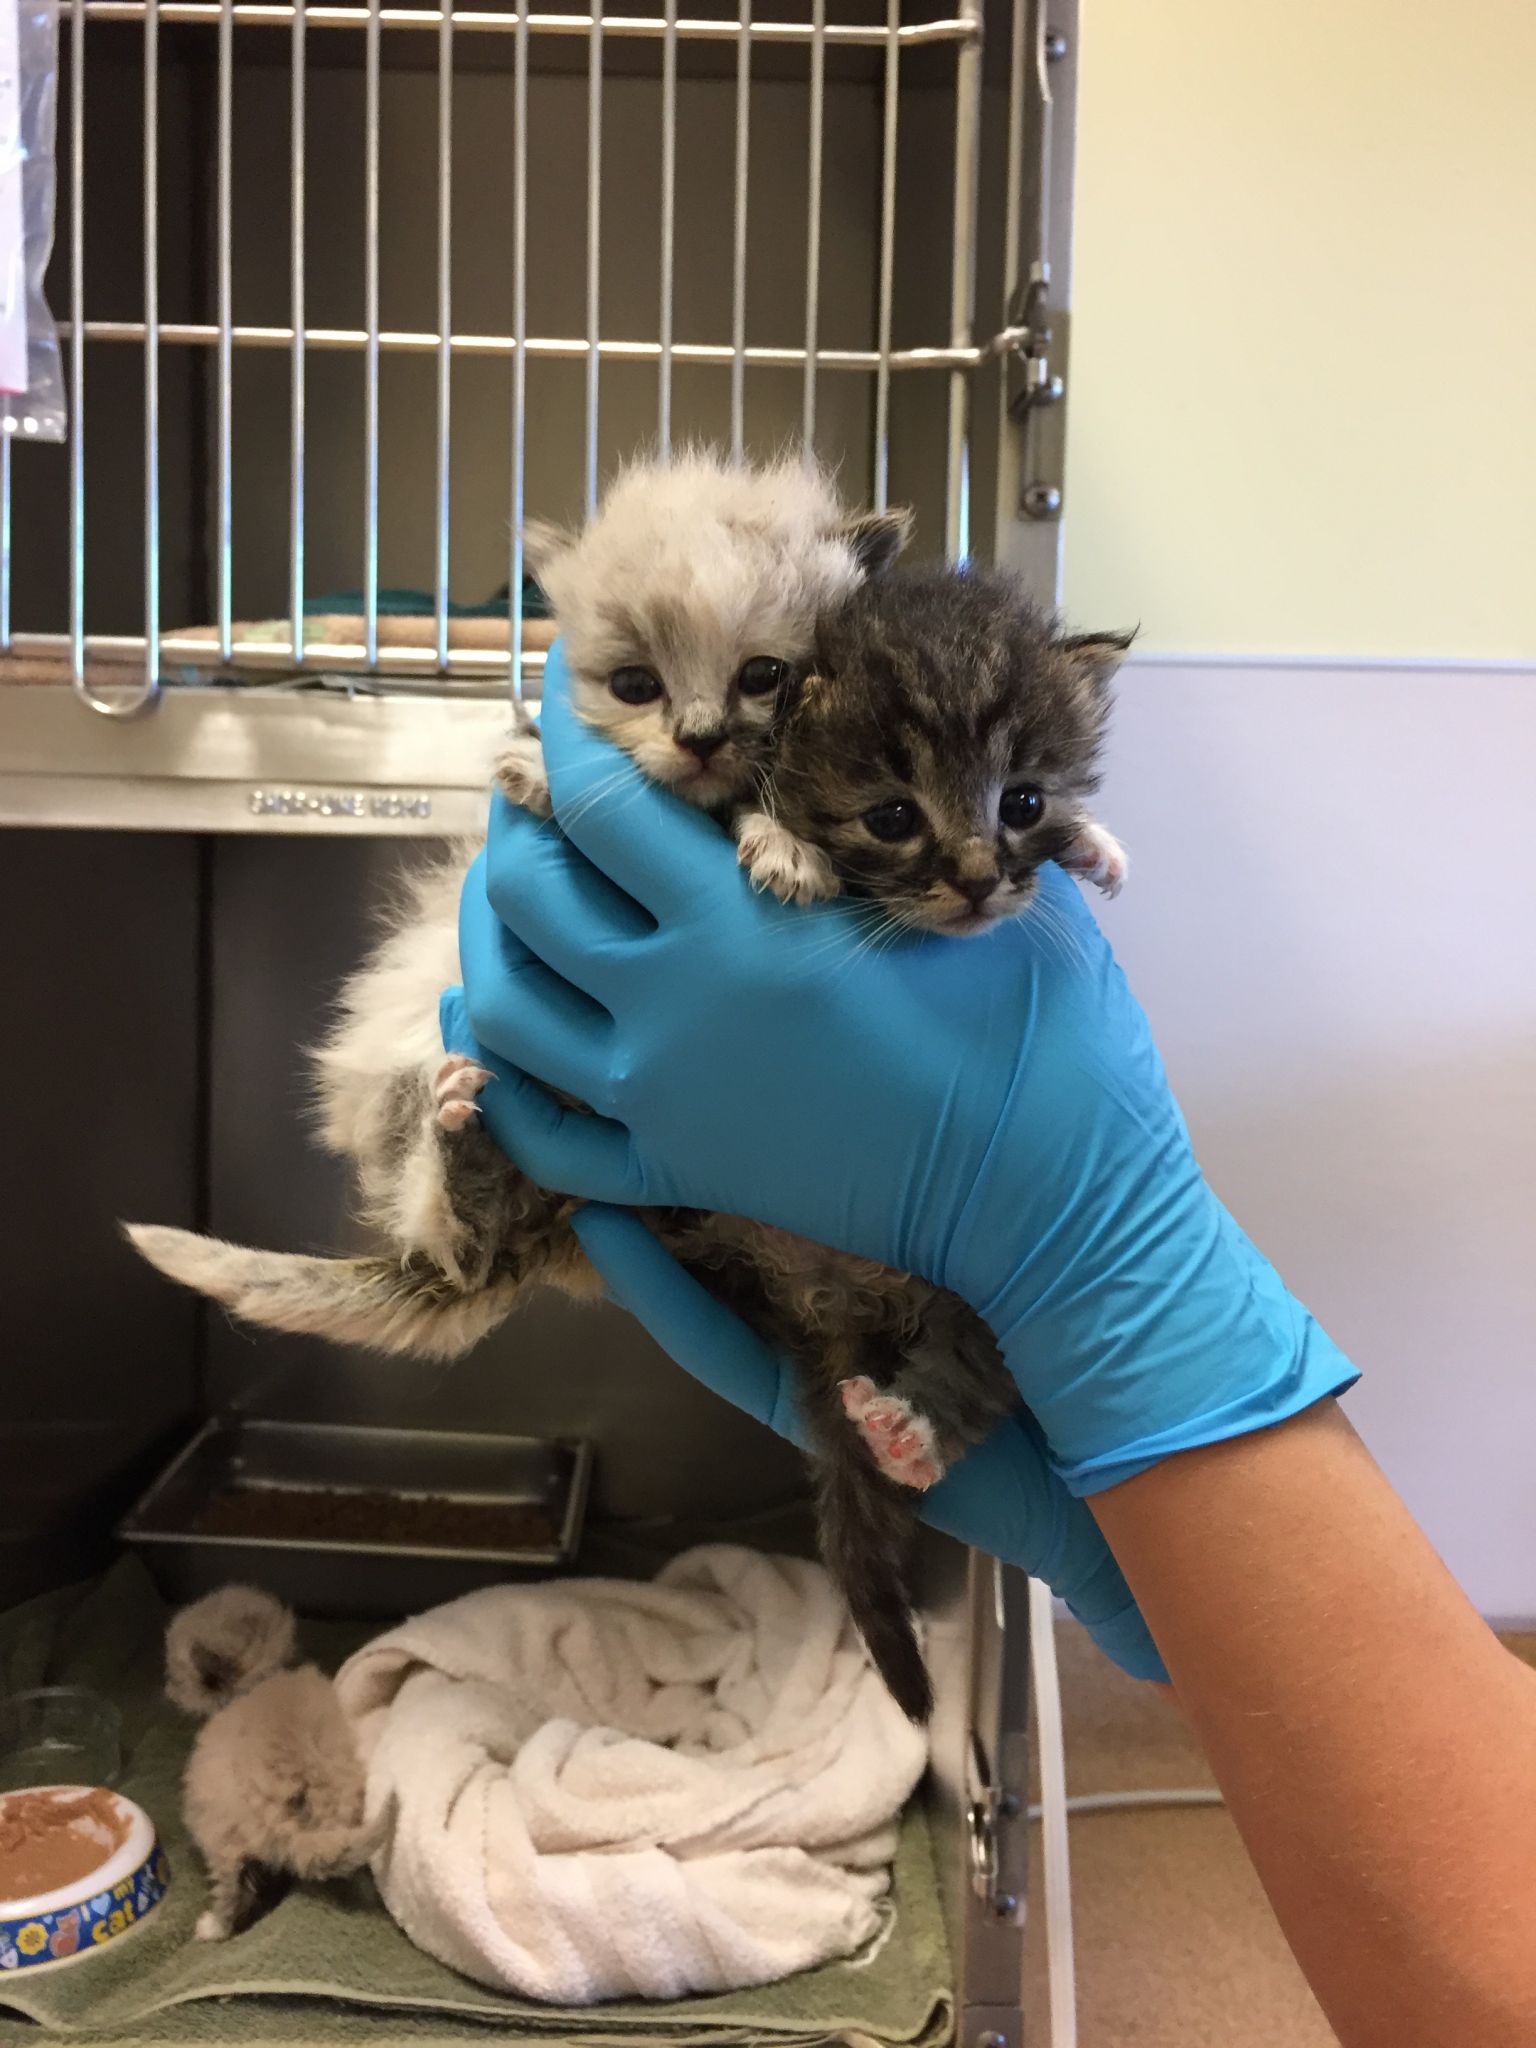 Photos: 'Unusual rescue' in Redwood City delivers 3-week-old kittens to safety - SFGate1536 x 2048